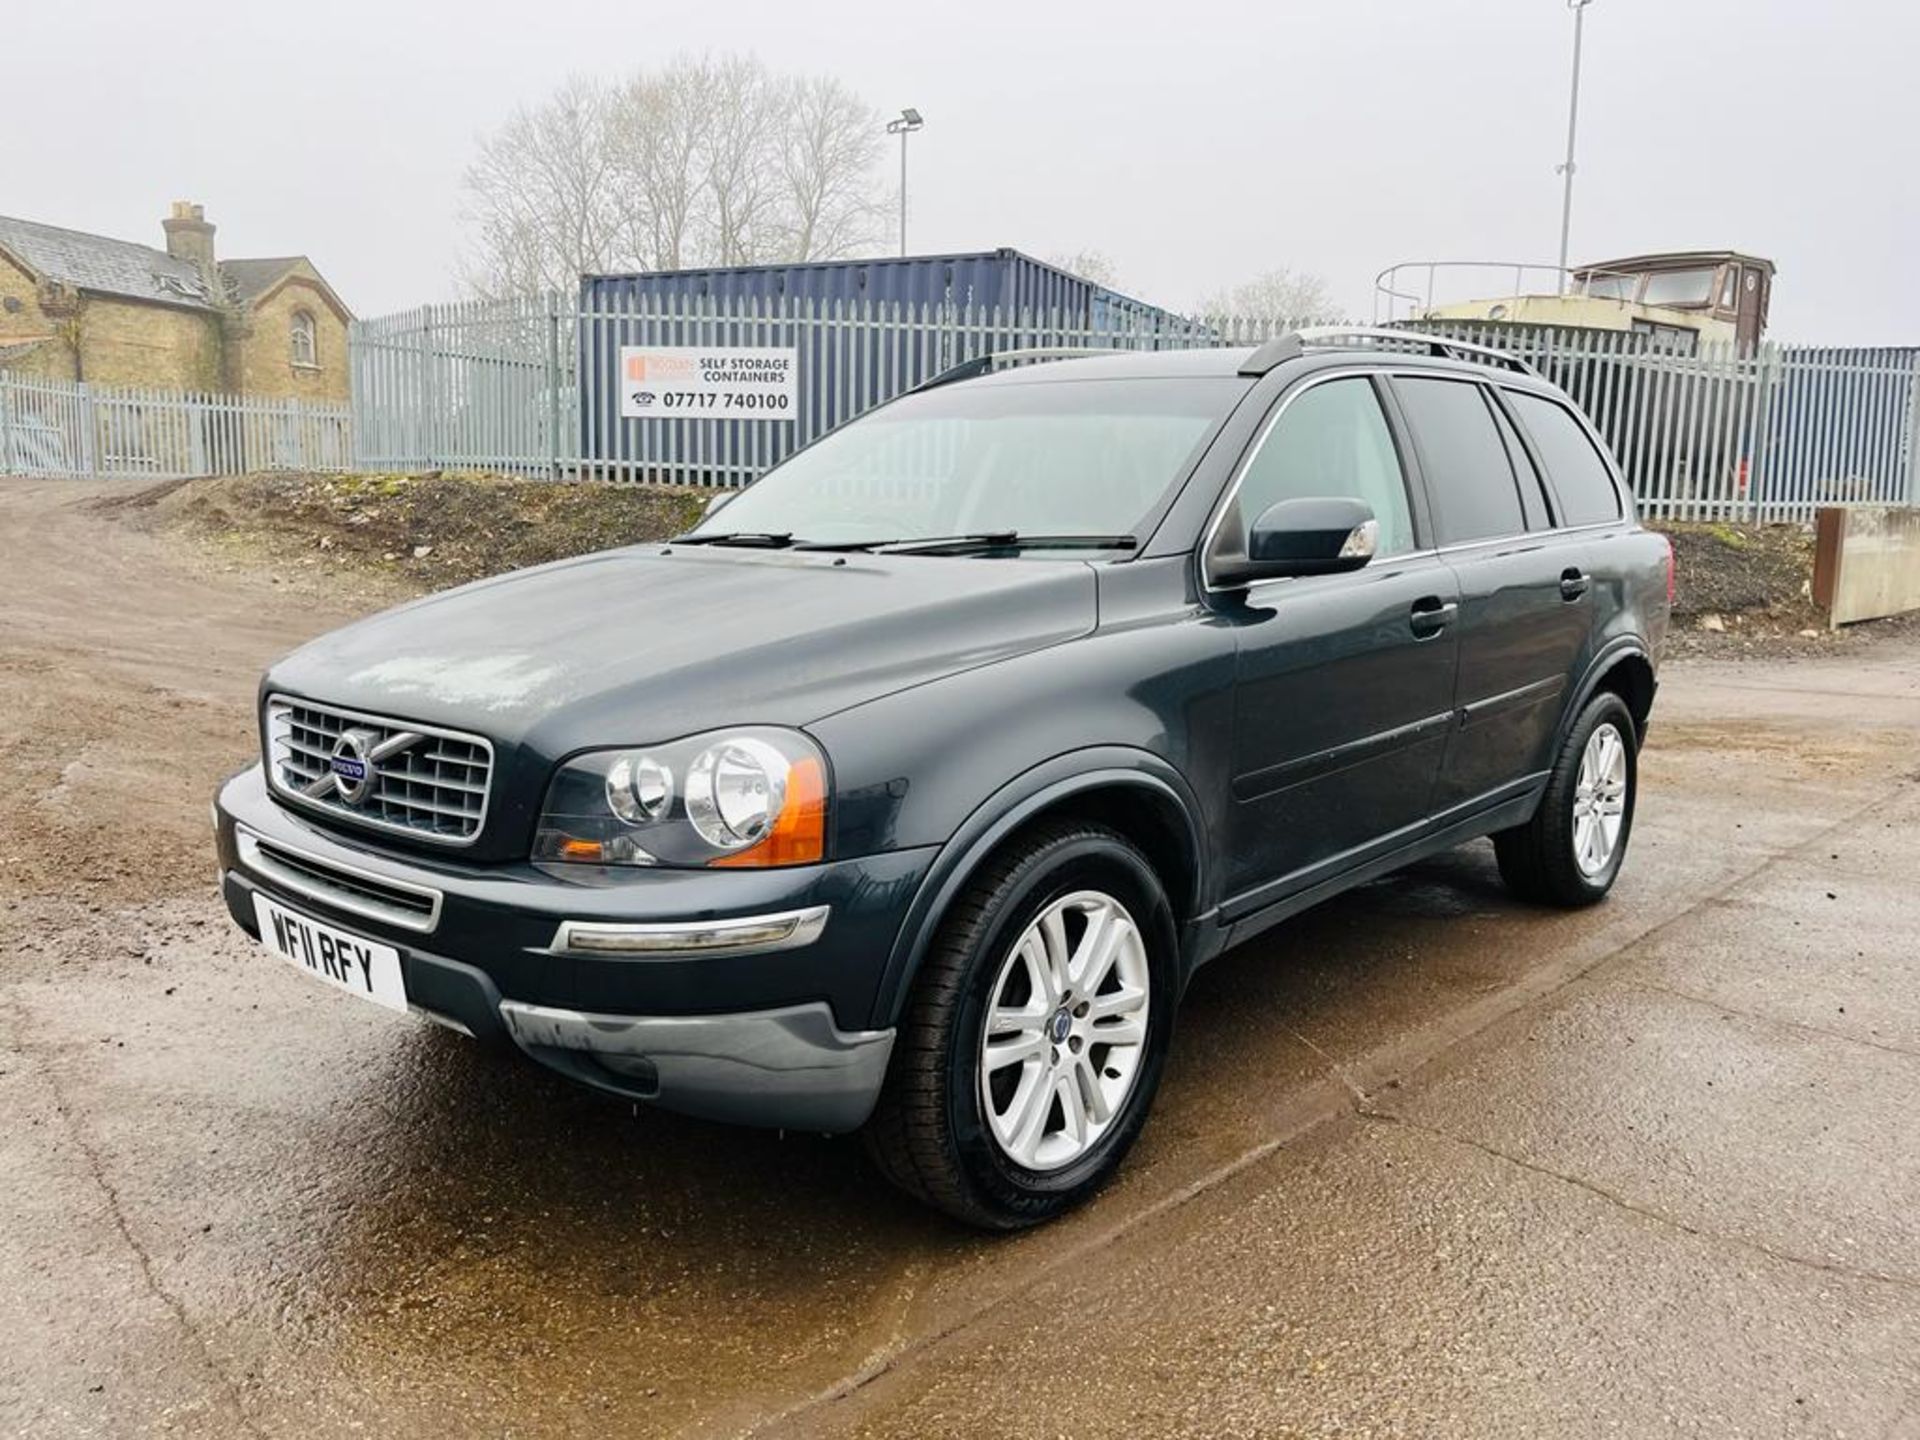 Volvo XC90 2.4 D5 200 SE G/T 4WD 2011 '11 Reg' A/C - No Vat - Ony 121,773 Miles - Image 3 of 35